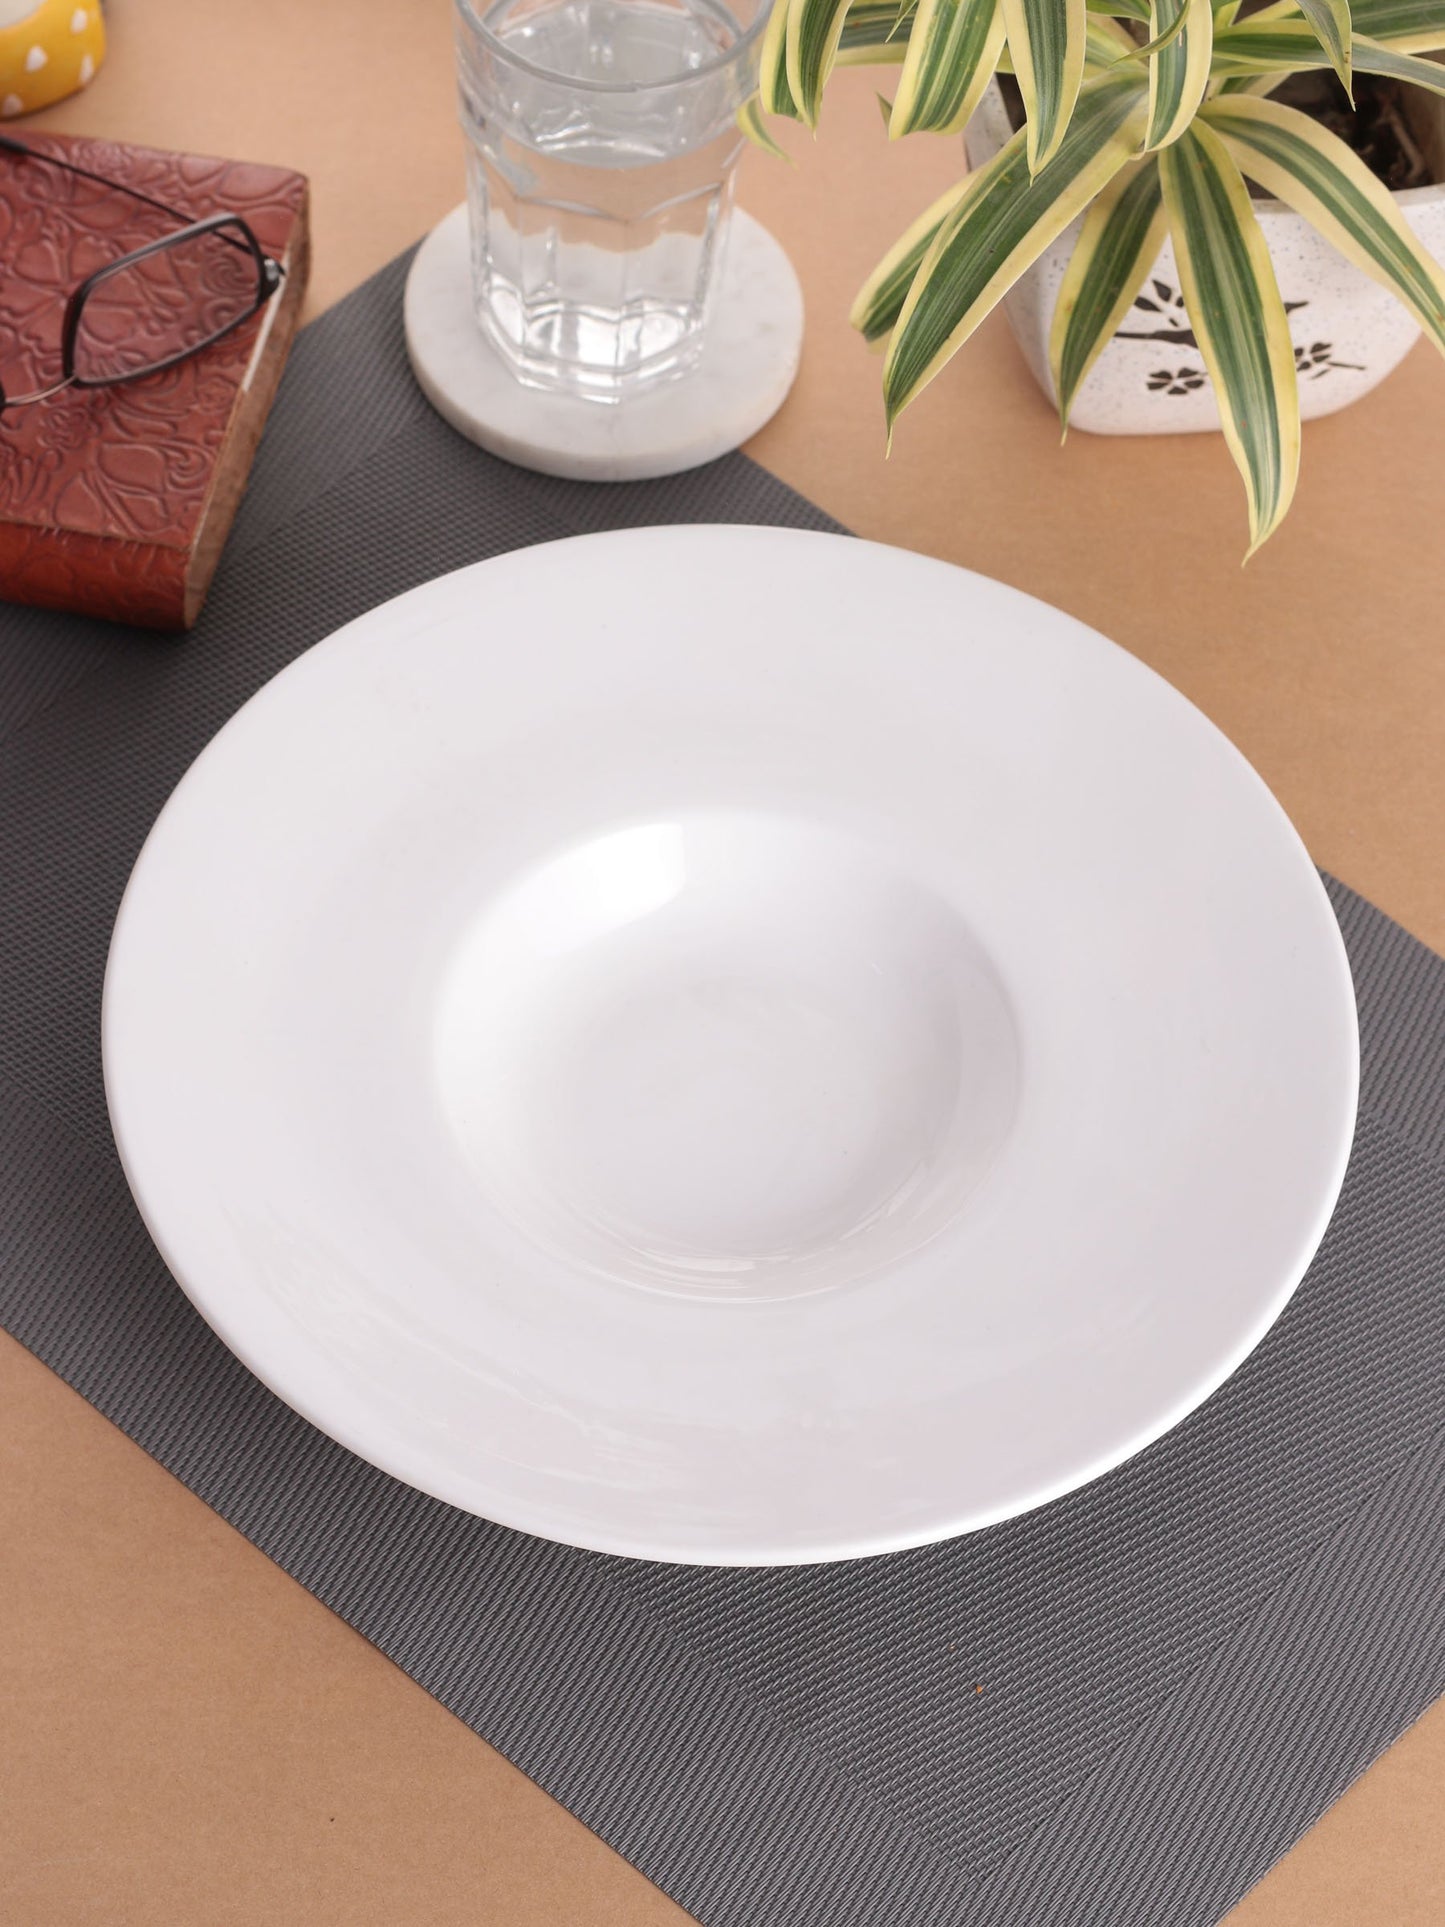 Clay Craft Basic Platter Gourmet Plate Flat 1 Piece Plain White - Clay Craft India